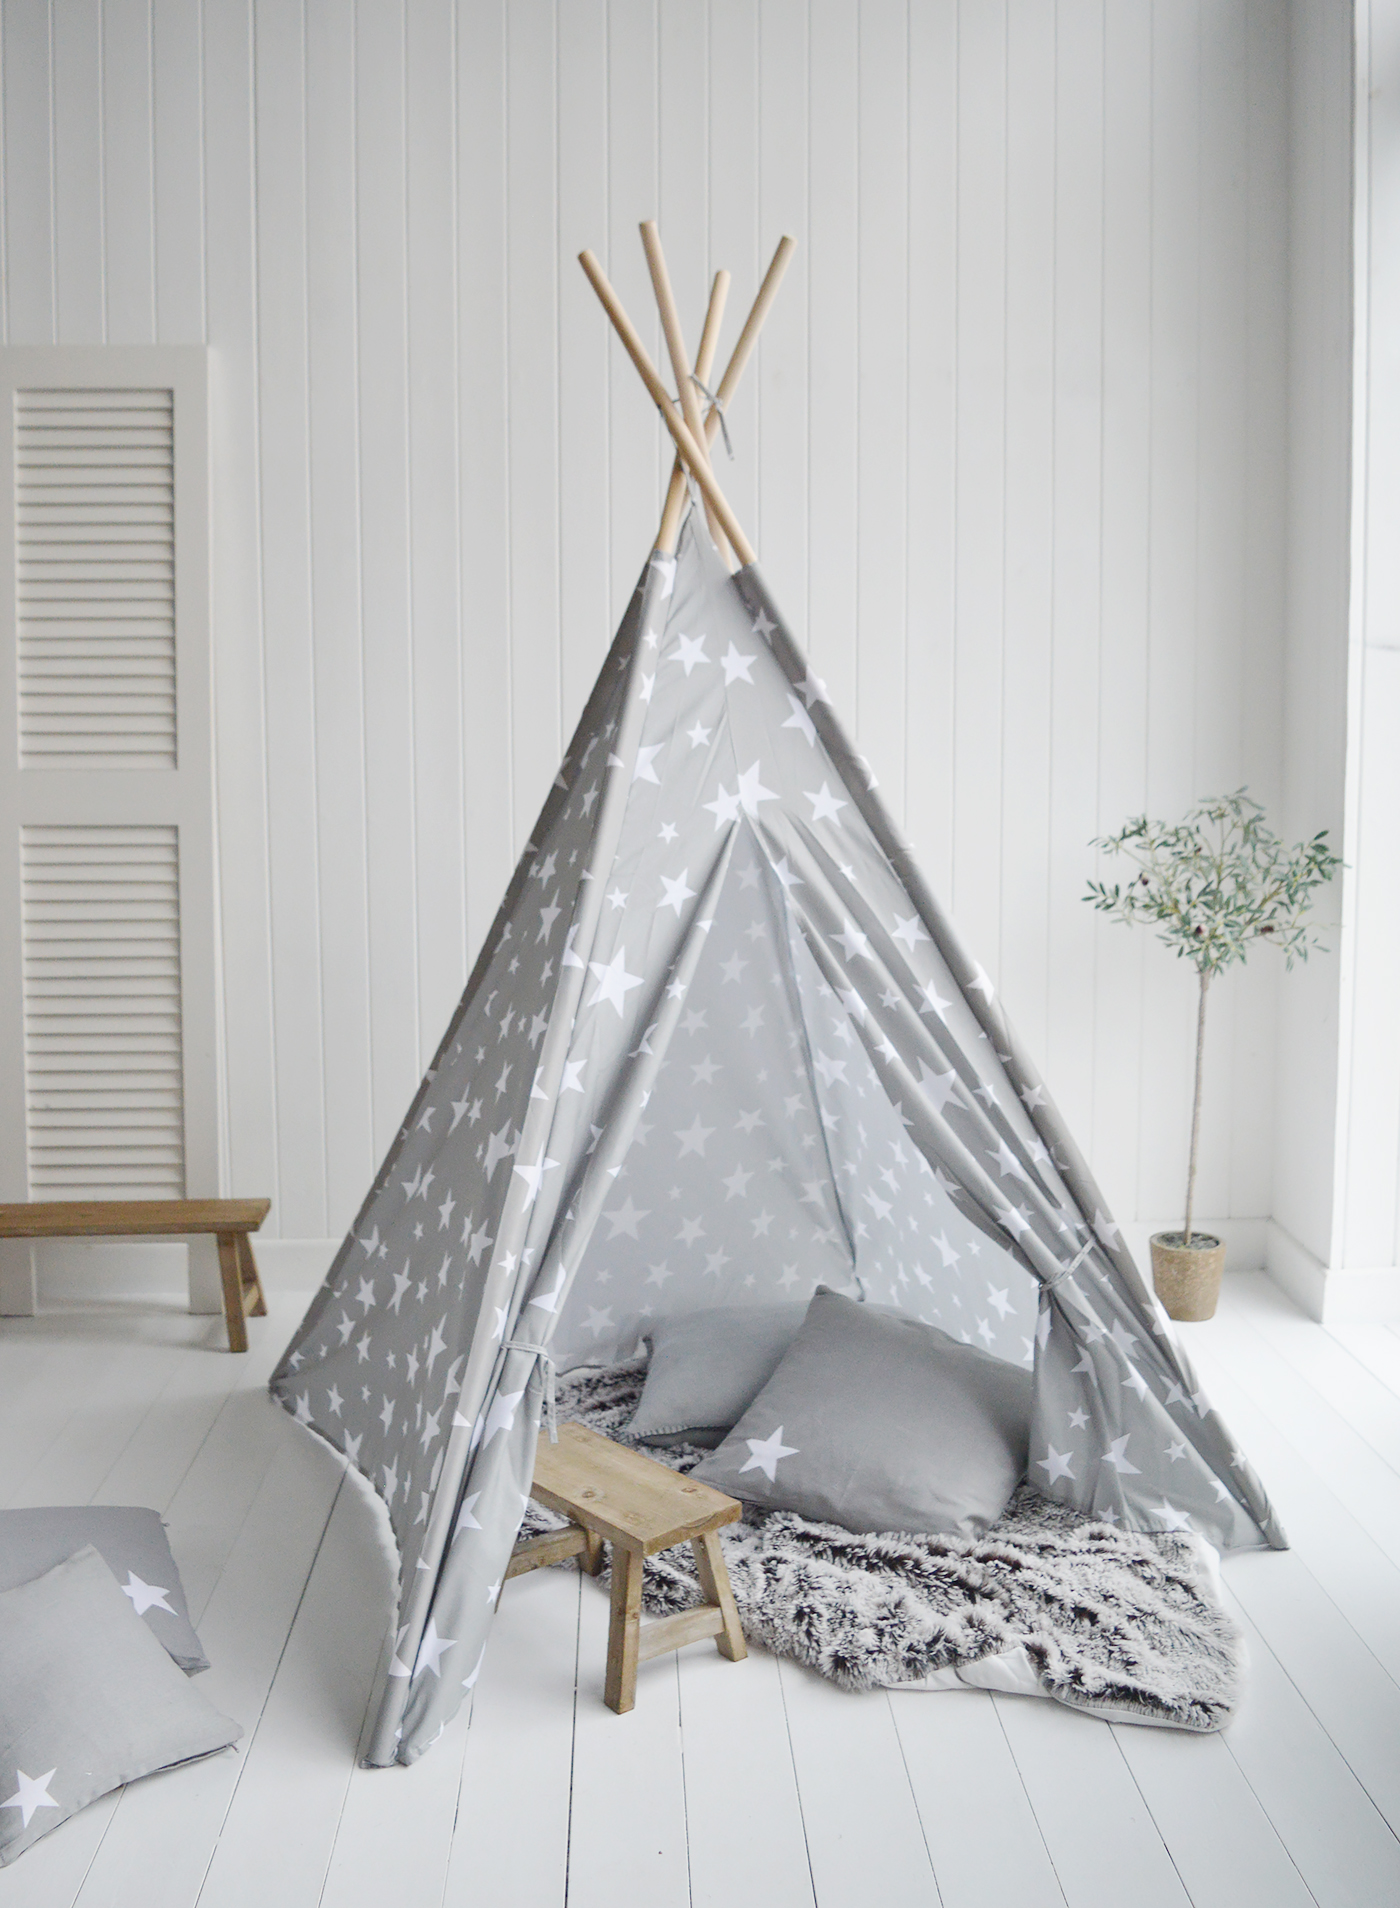 Grey and White Star Tepee - New England Furniture for coastal and country styled homes and interiors